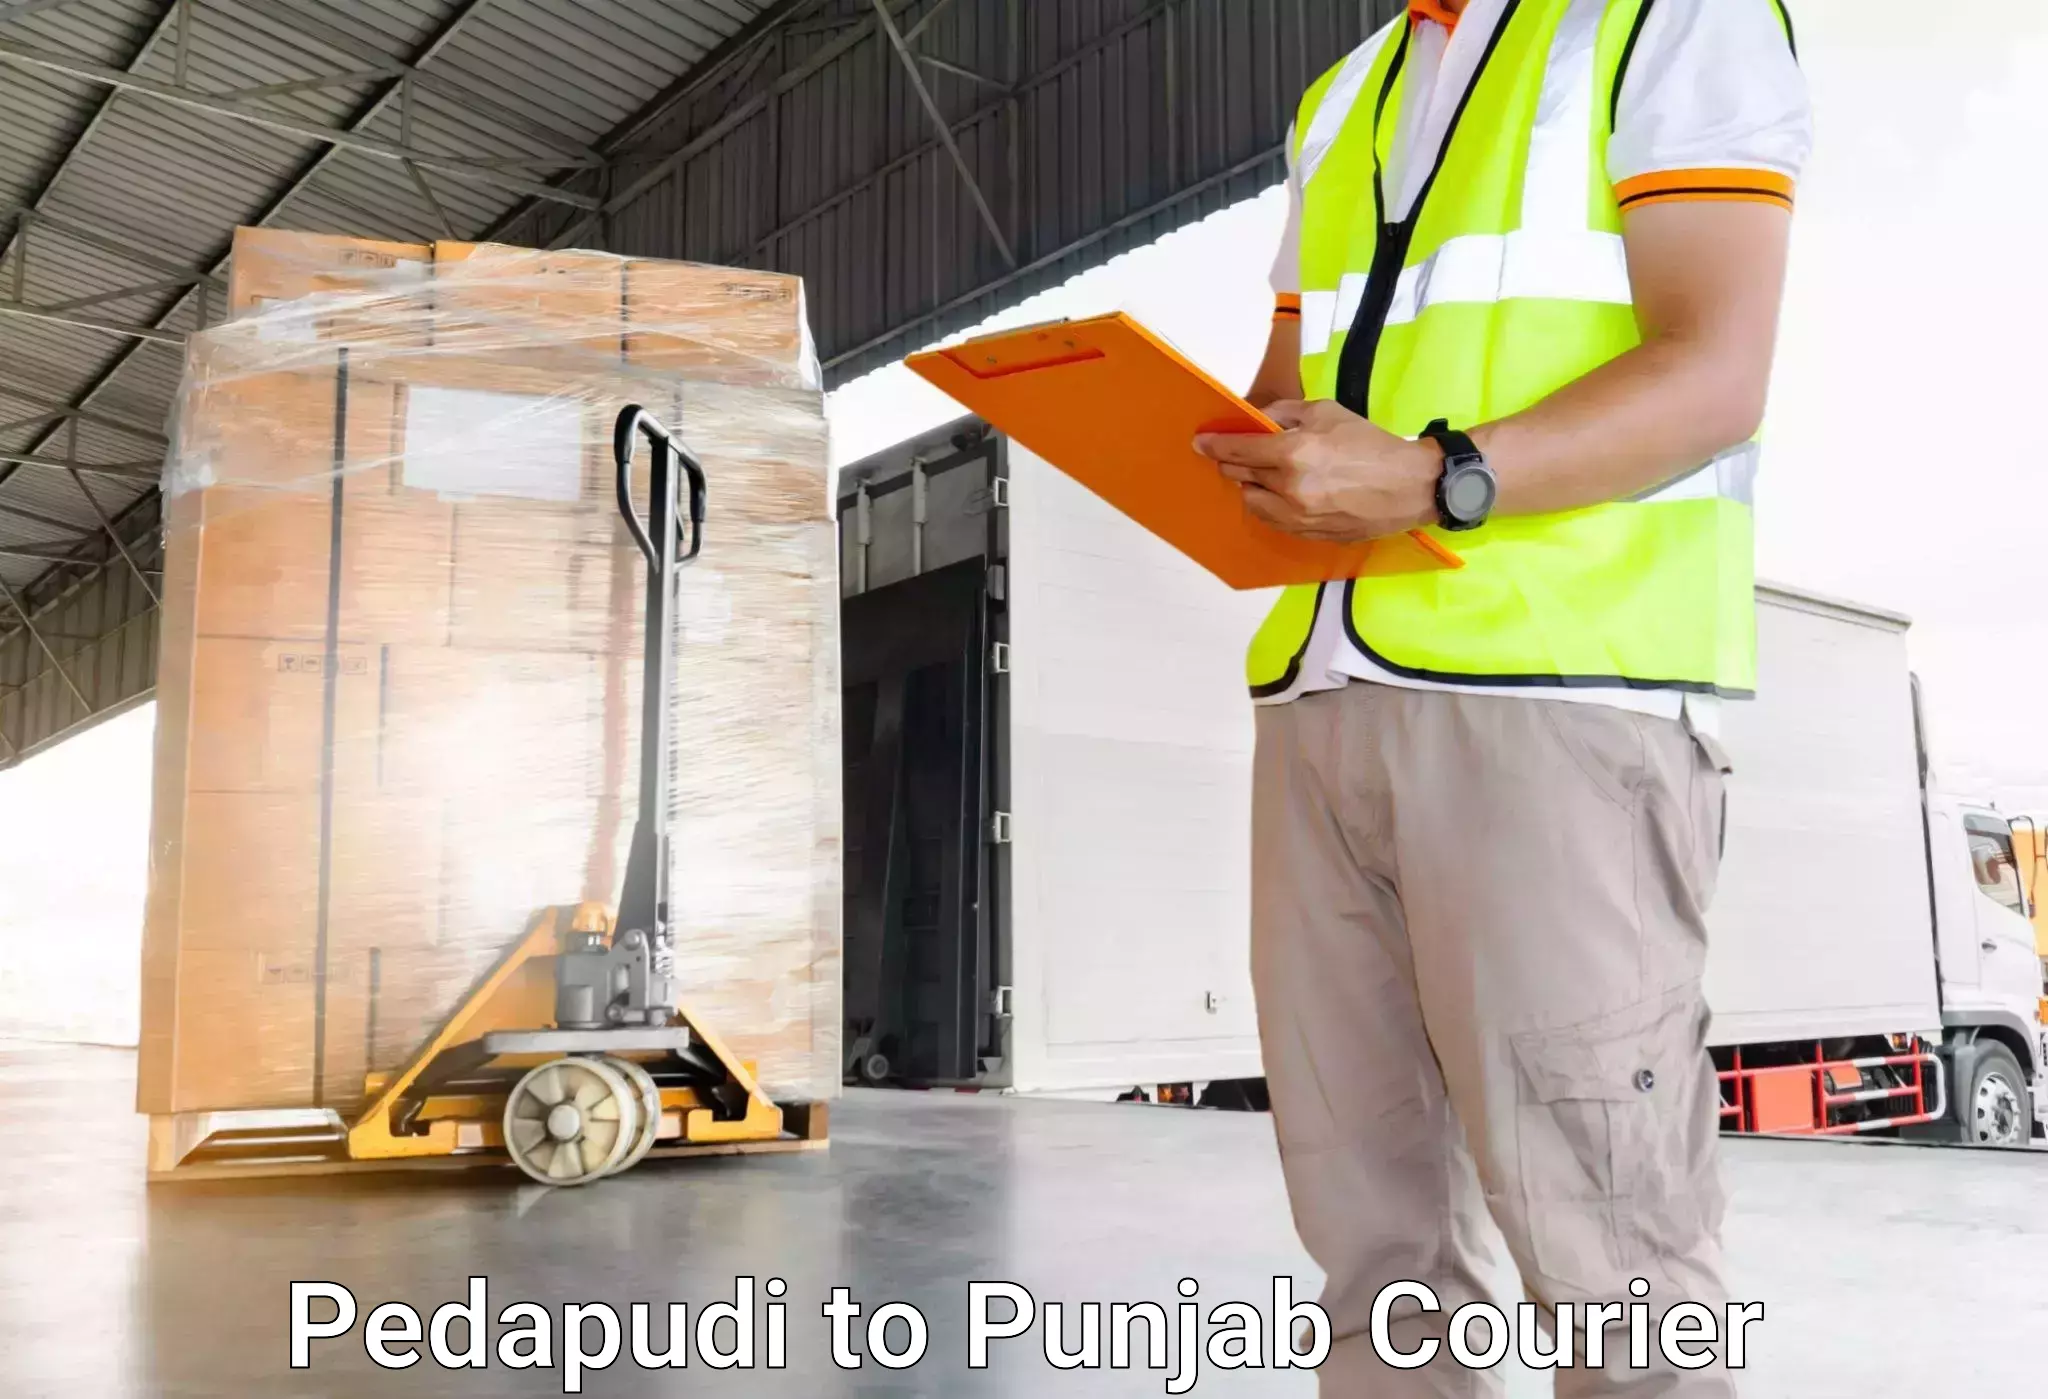 Luggage delivery network Pedapudi to Punjab